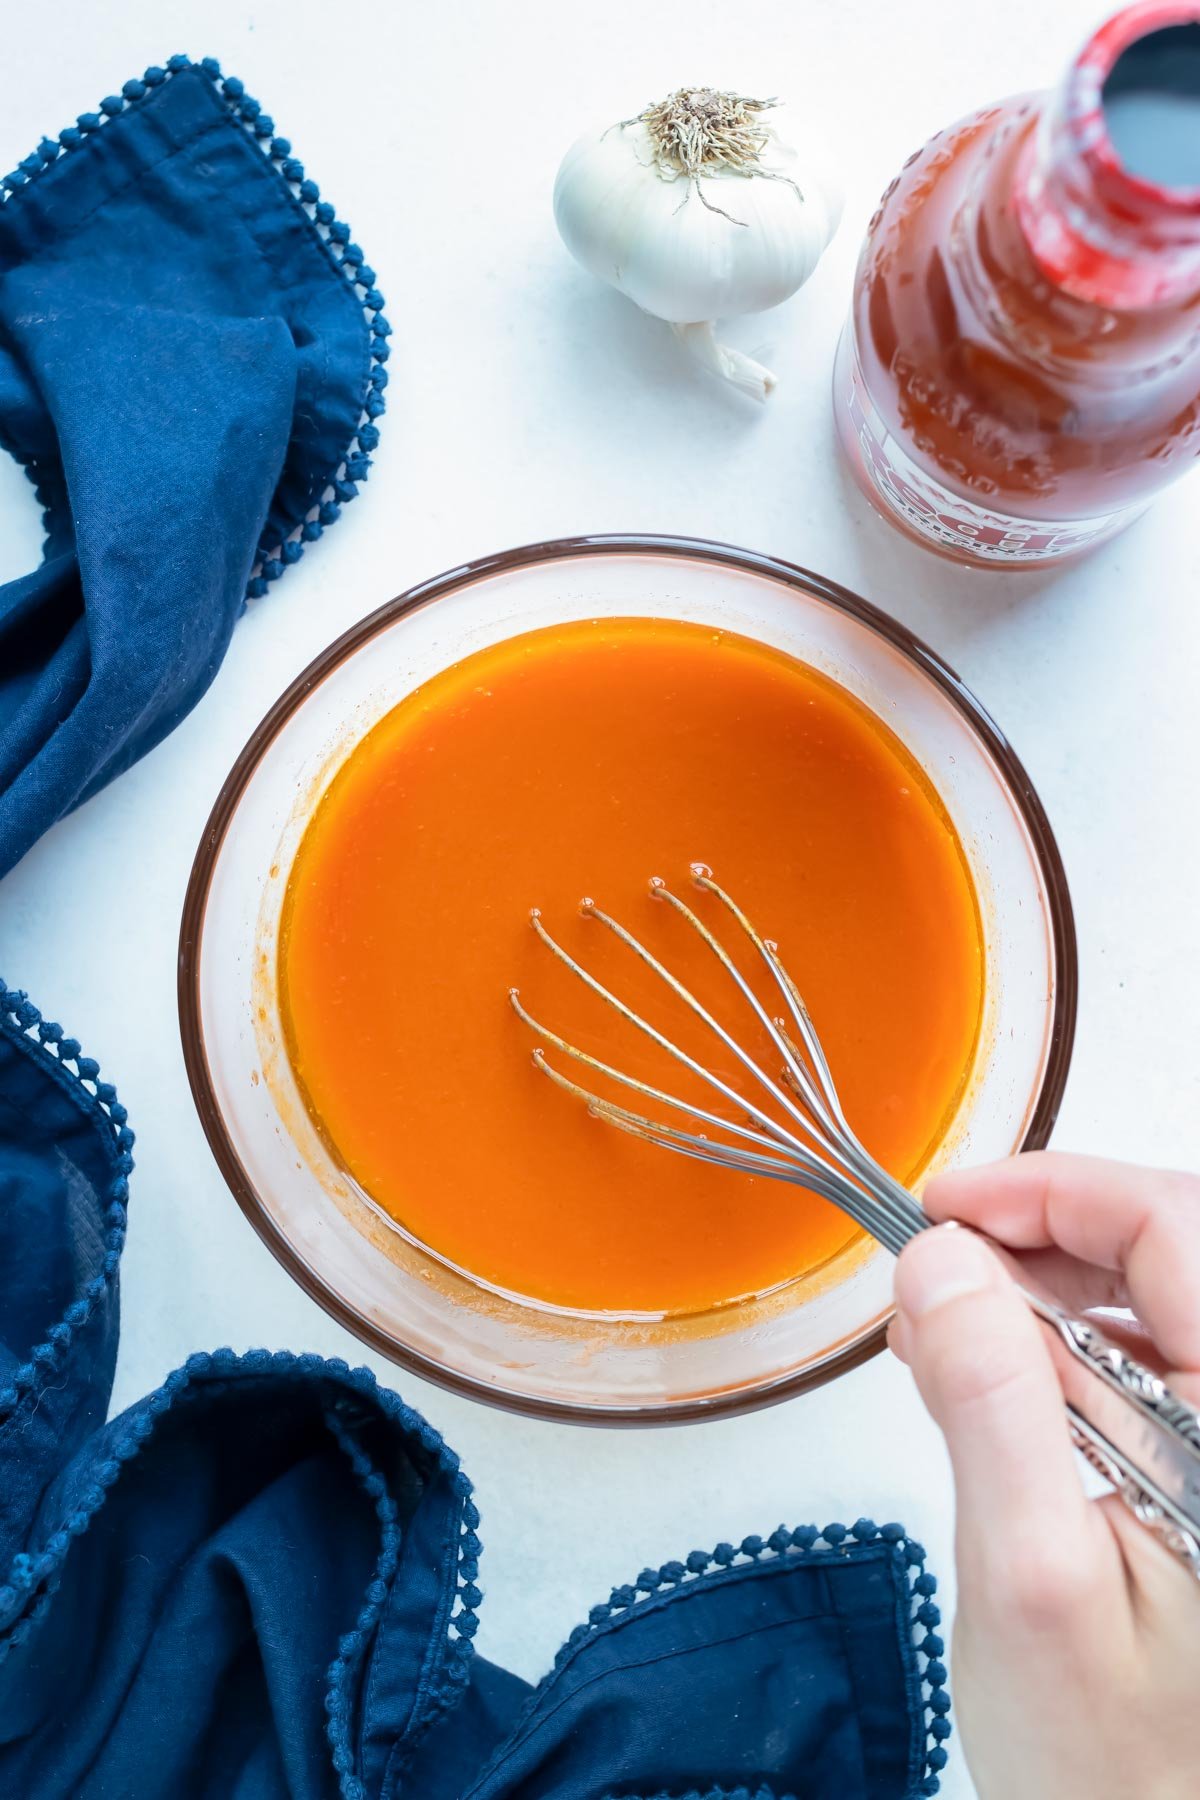 Homemade buffalo sauce is made in a glass bowl.